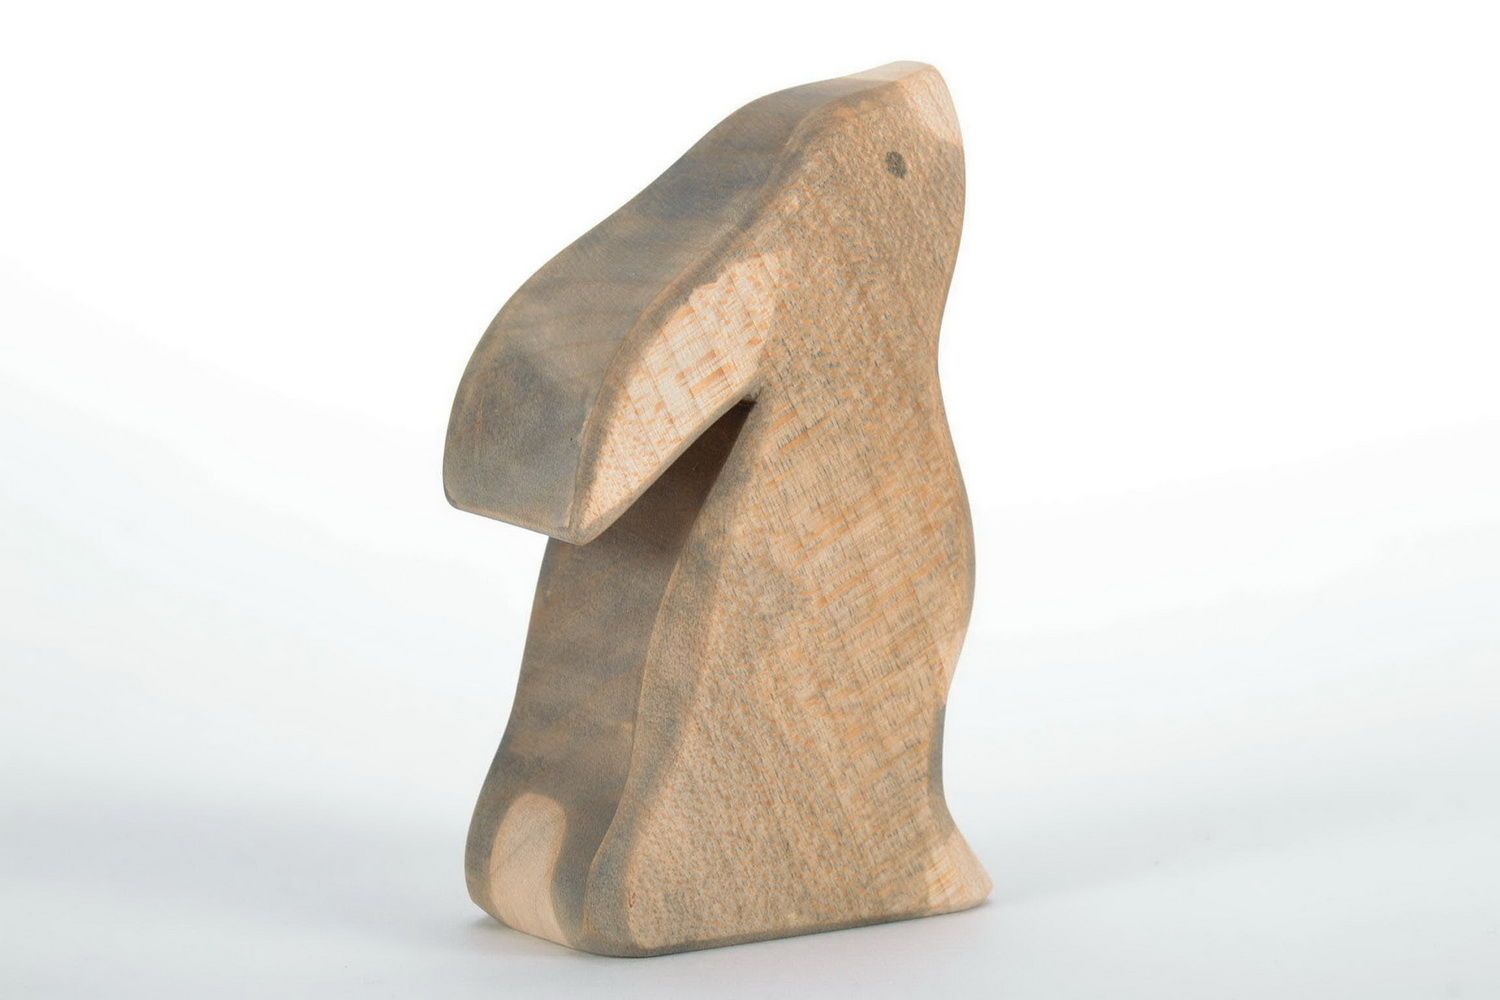 Statuette cut from wood by hand Rabbit photo 4